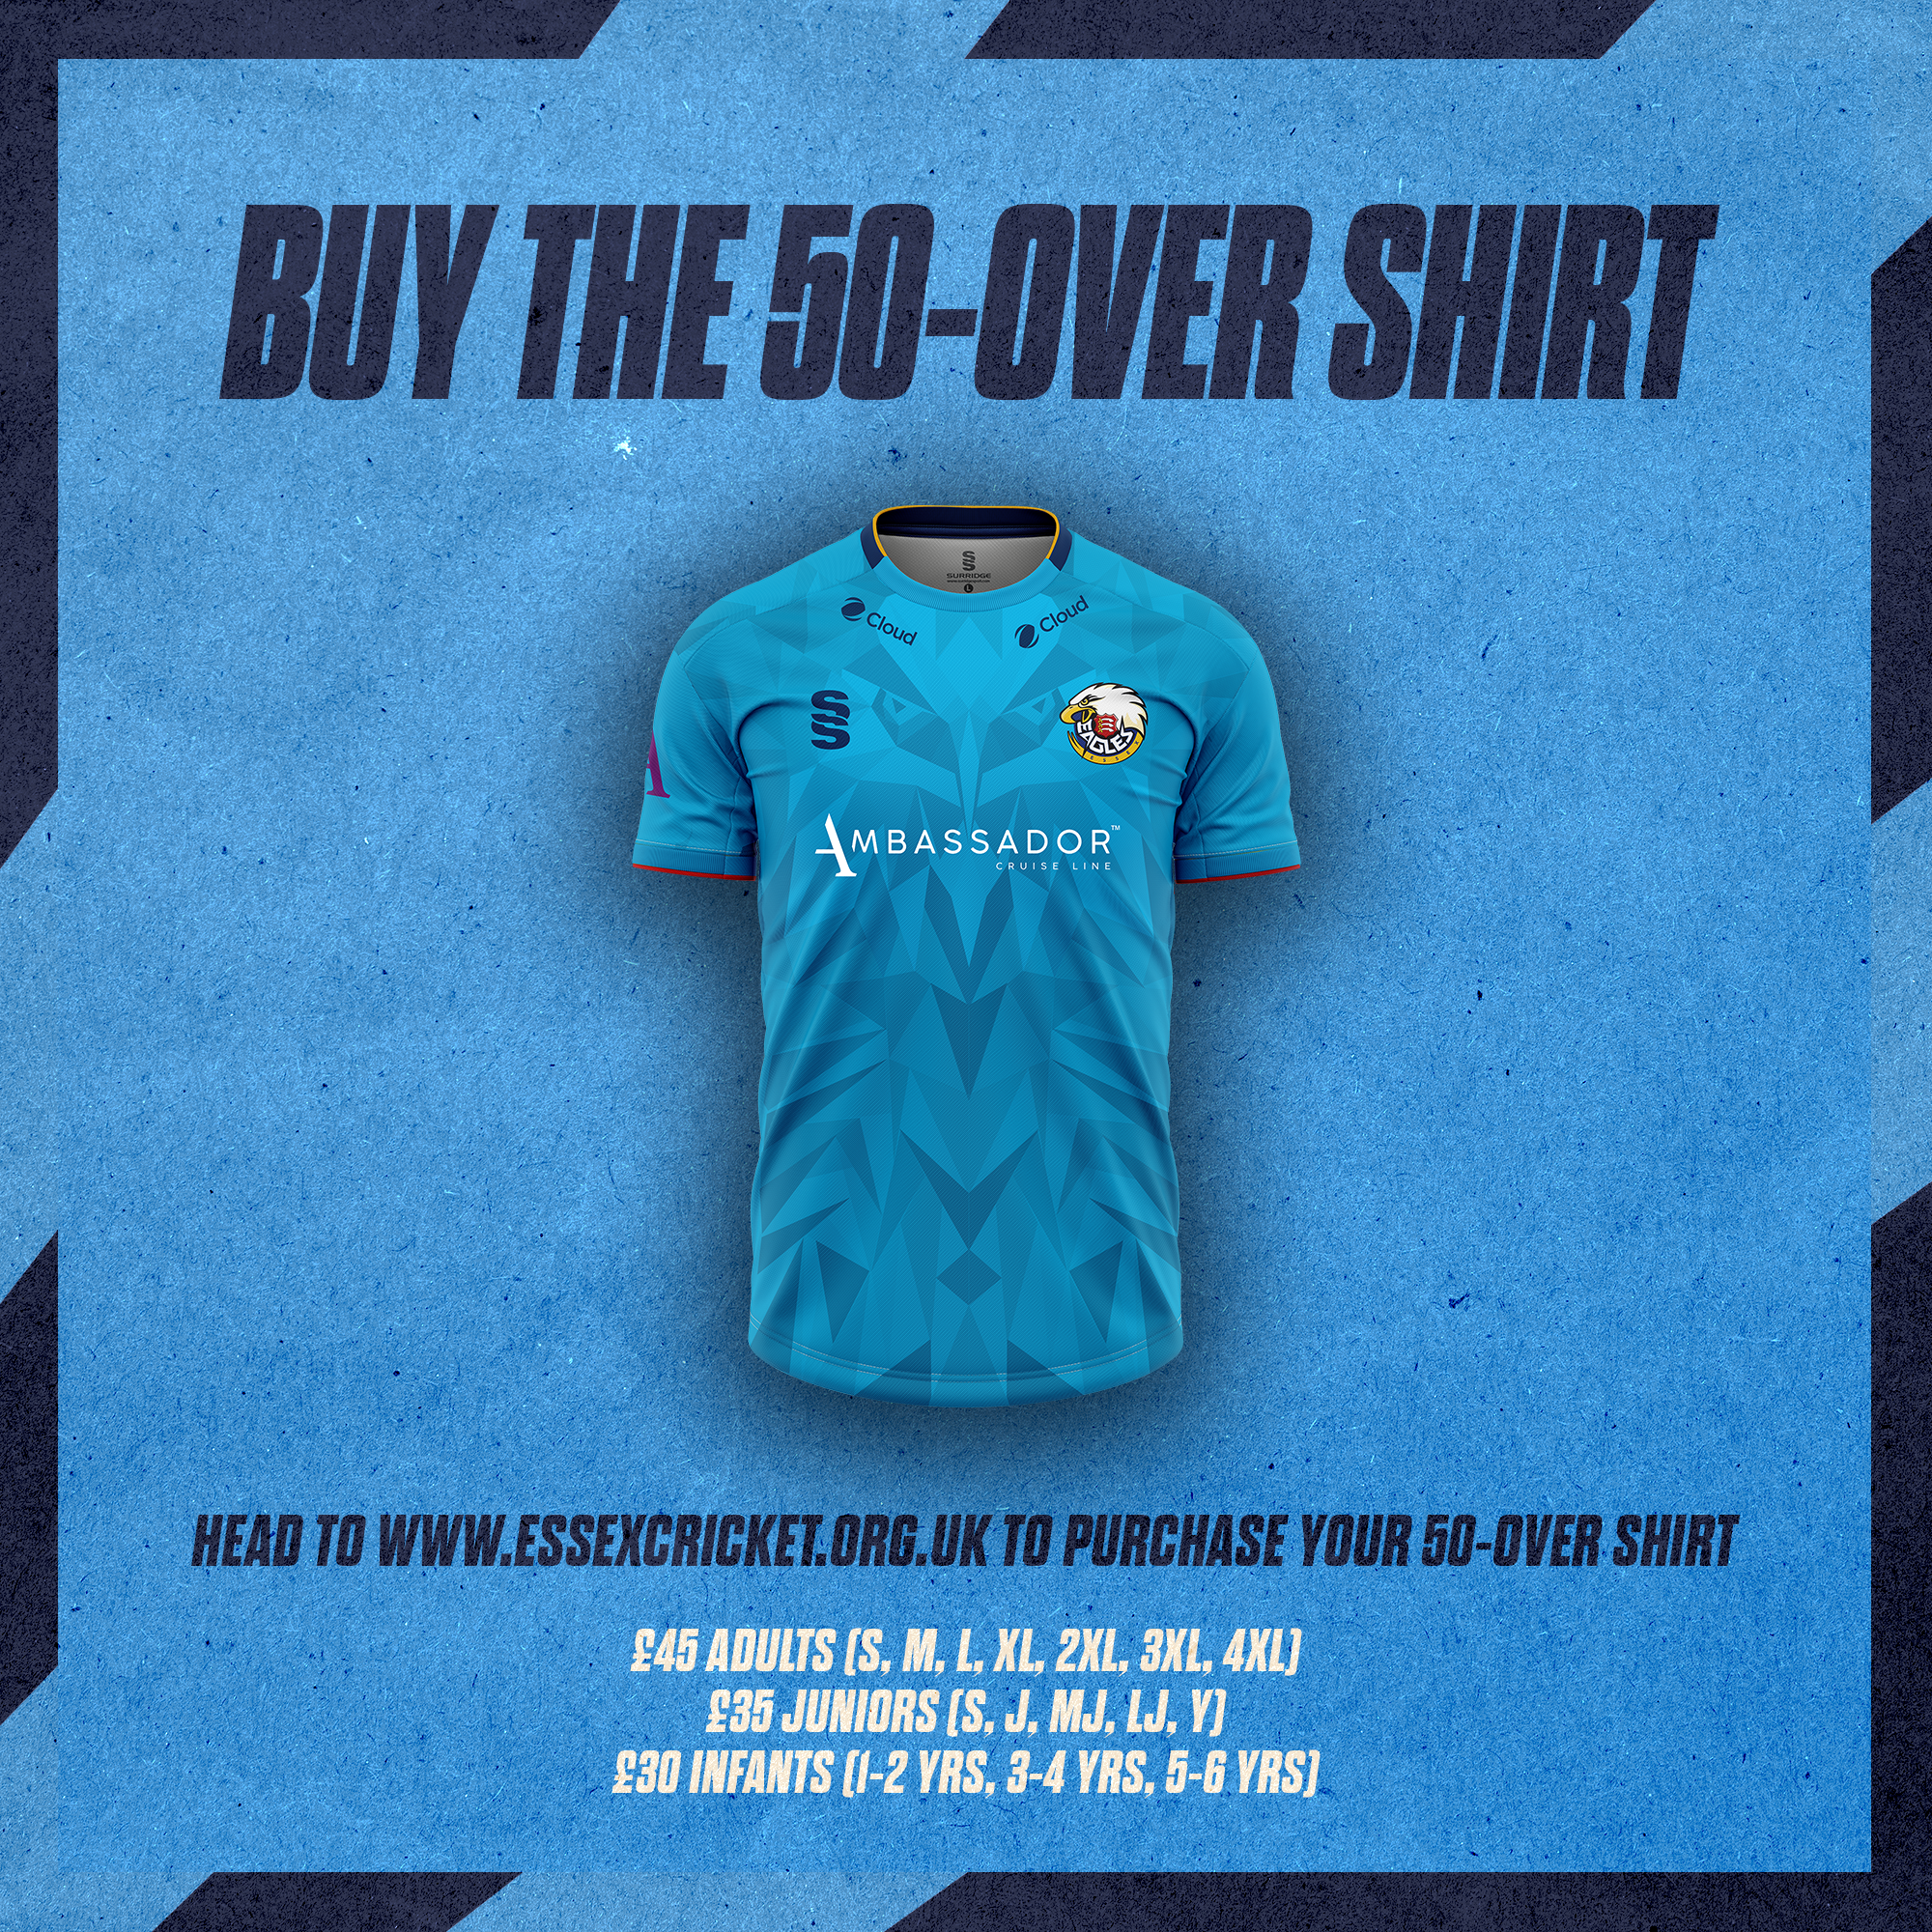 BUY THE 50 OVER SHIRT